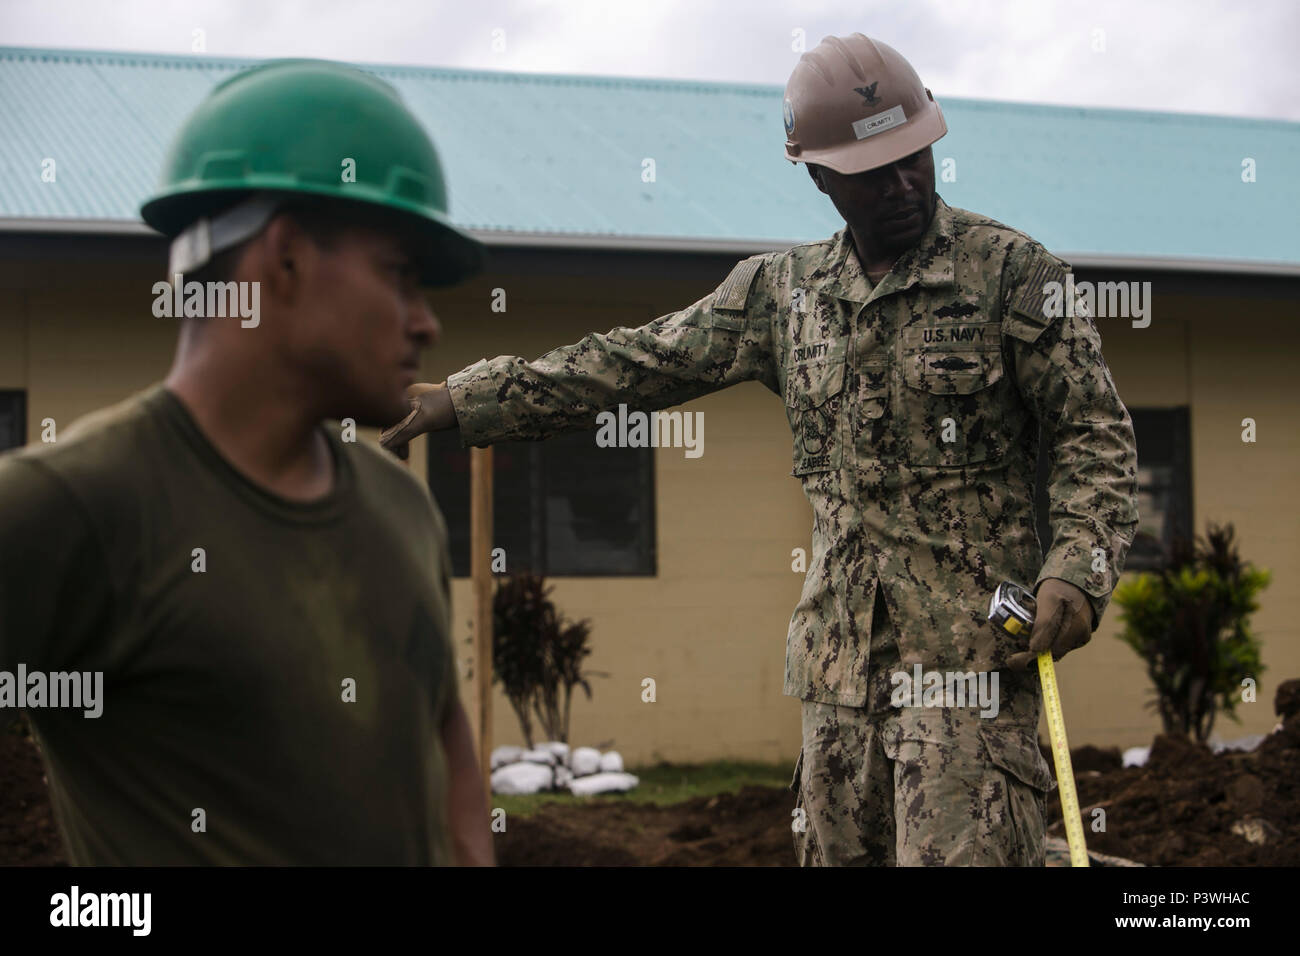 CAWACI, OVALAU, Fiji — Petty Officer Second Class Ray F. Crumity (Right) and Lance Cpl. J Guadelupe Venegas take a break from digging during vertical construction training, July 8, 2016, on Ovalau, Fiji. Marines and Sailors with Task Force Koa Moana conduct vertical construction training and infantry training on the island with members of the Republic of Fiji Military Force to increase interoperability and relations. Crumity, from Moreno Valley, California, is a steel worker with the task force, originally assigned to Company E, Naval Mobile Construction Battalion 4. Venegas, from San Gabriel, Stock Photo